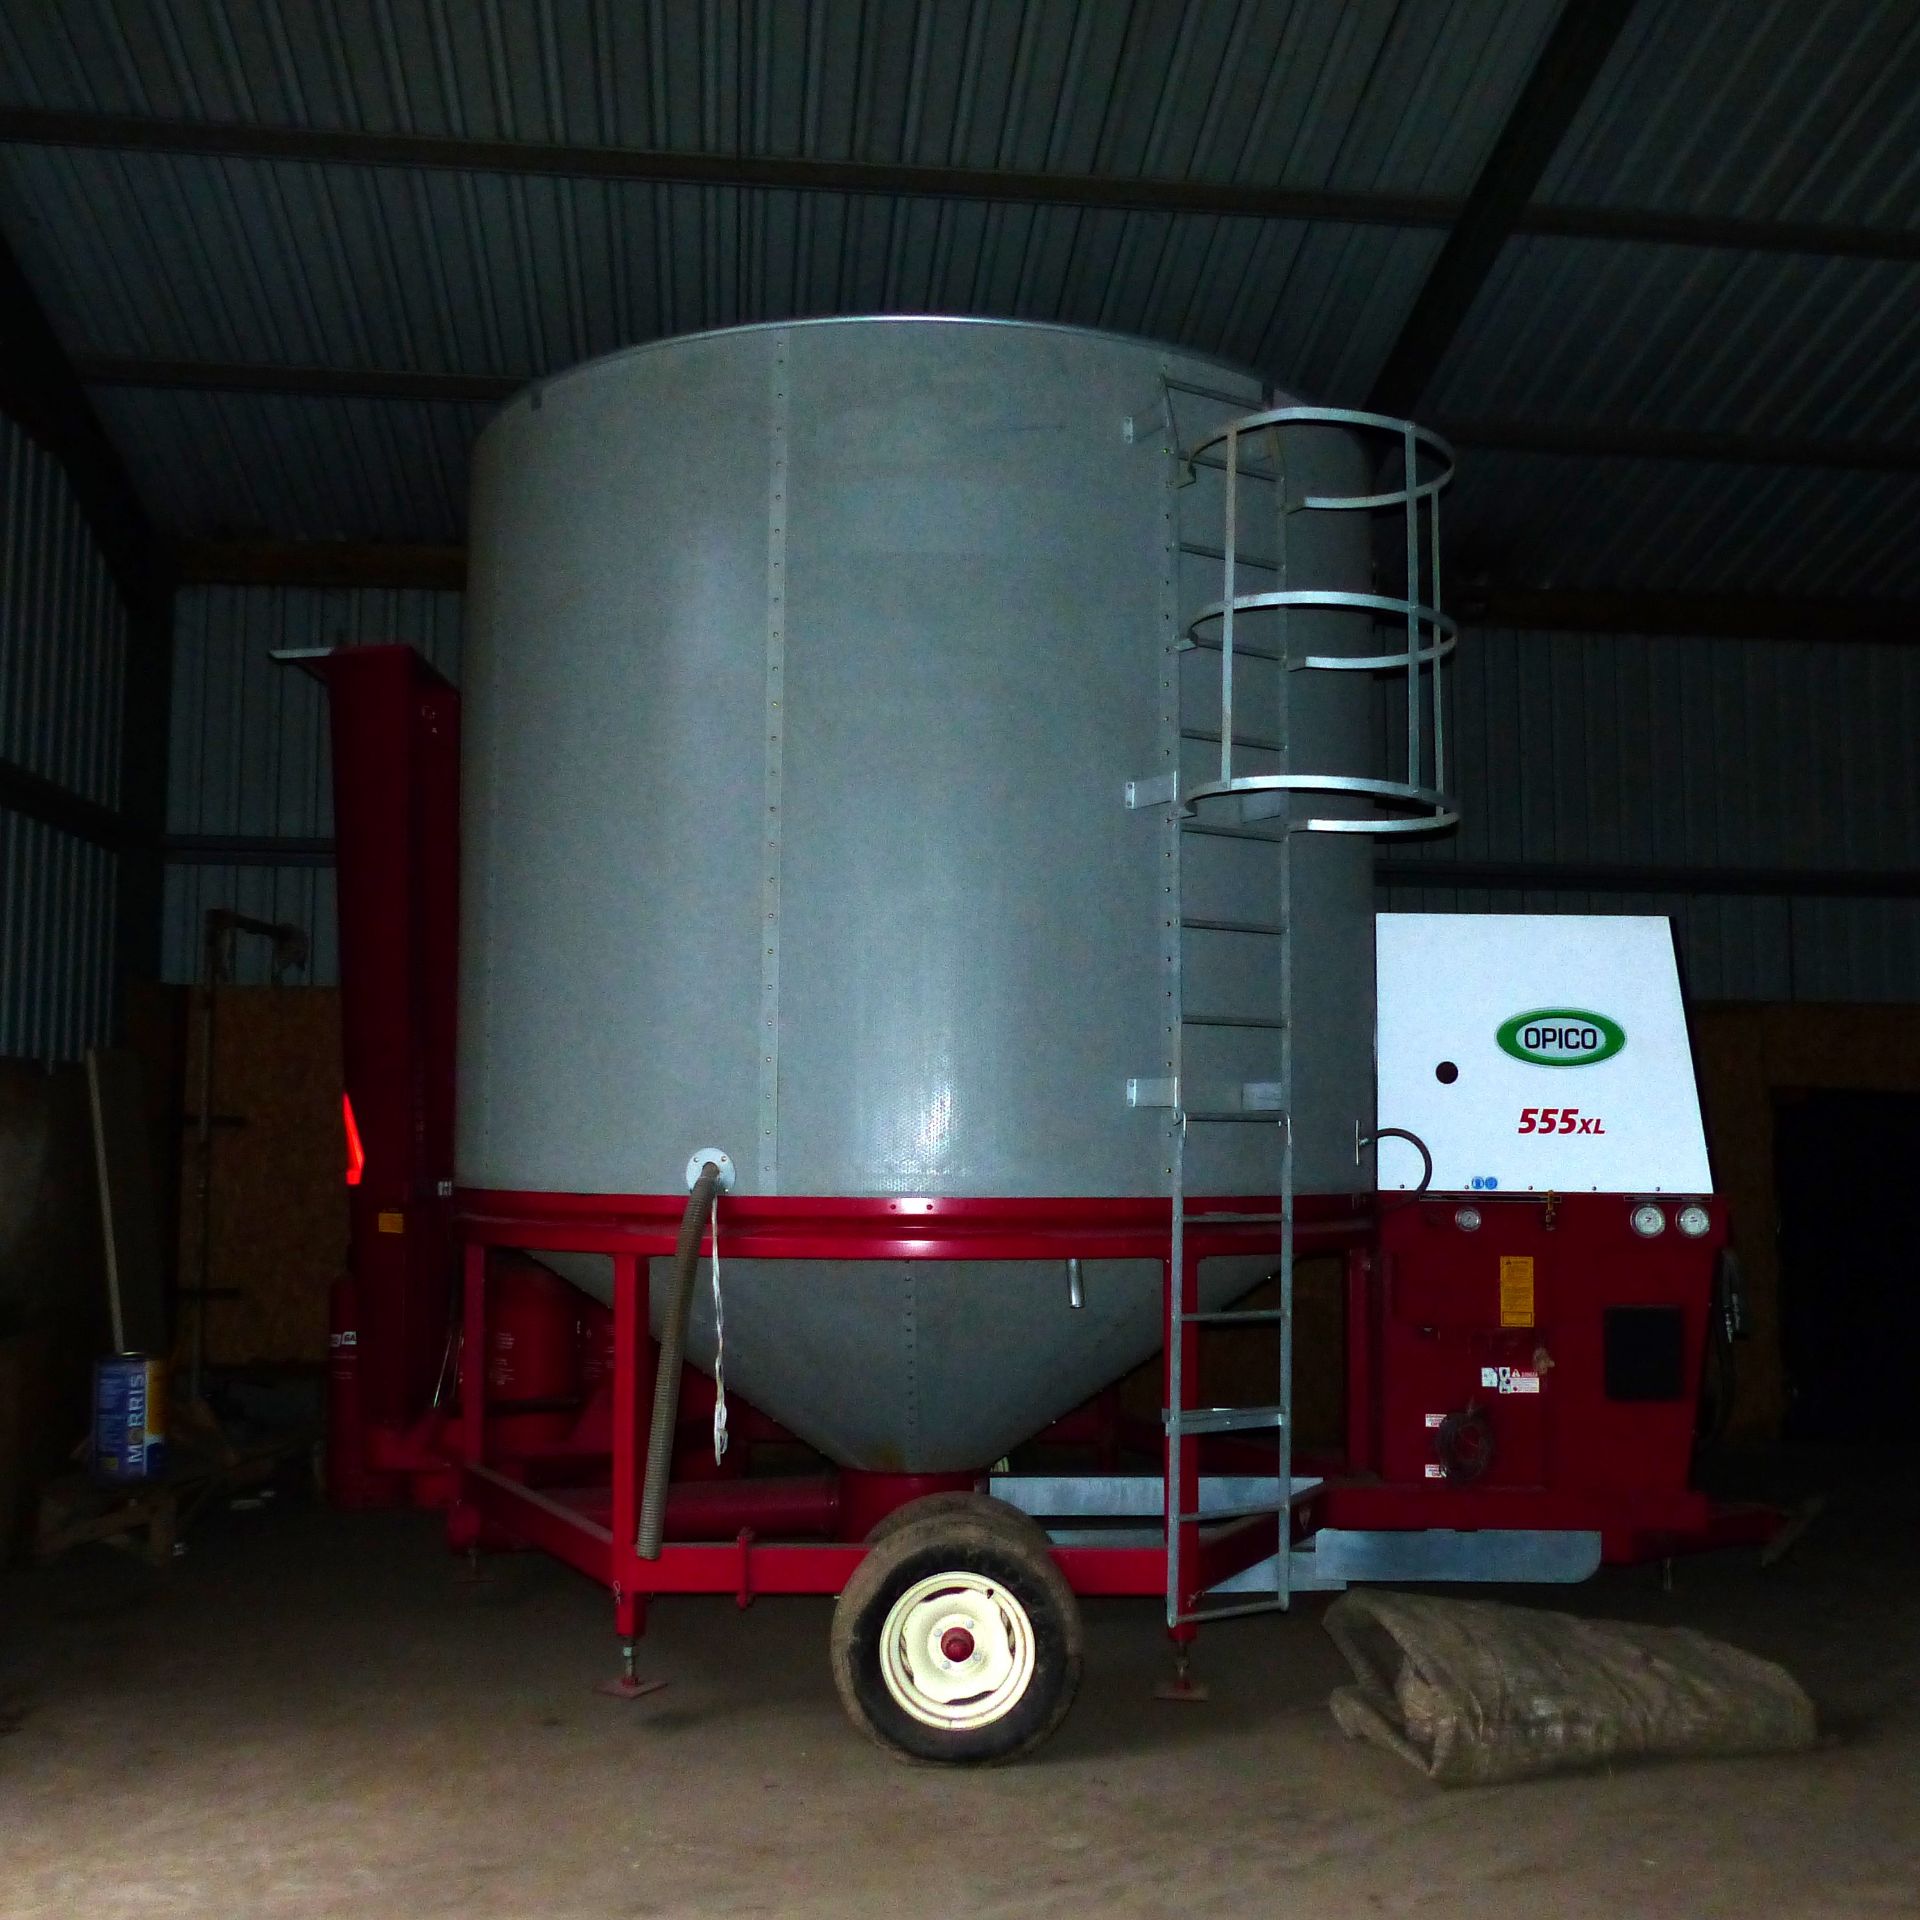 2010 OPICO 555 EXCEL MOBILE DRYER - Image 3 of 3